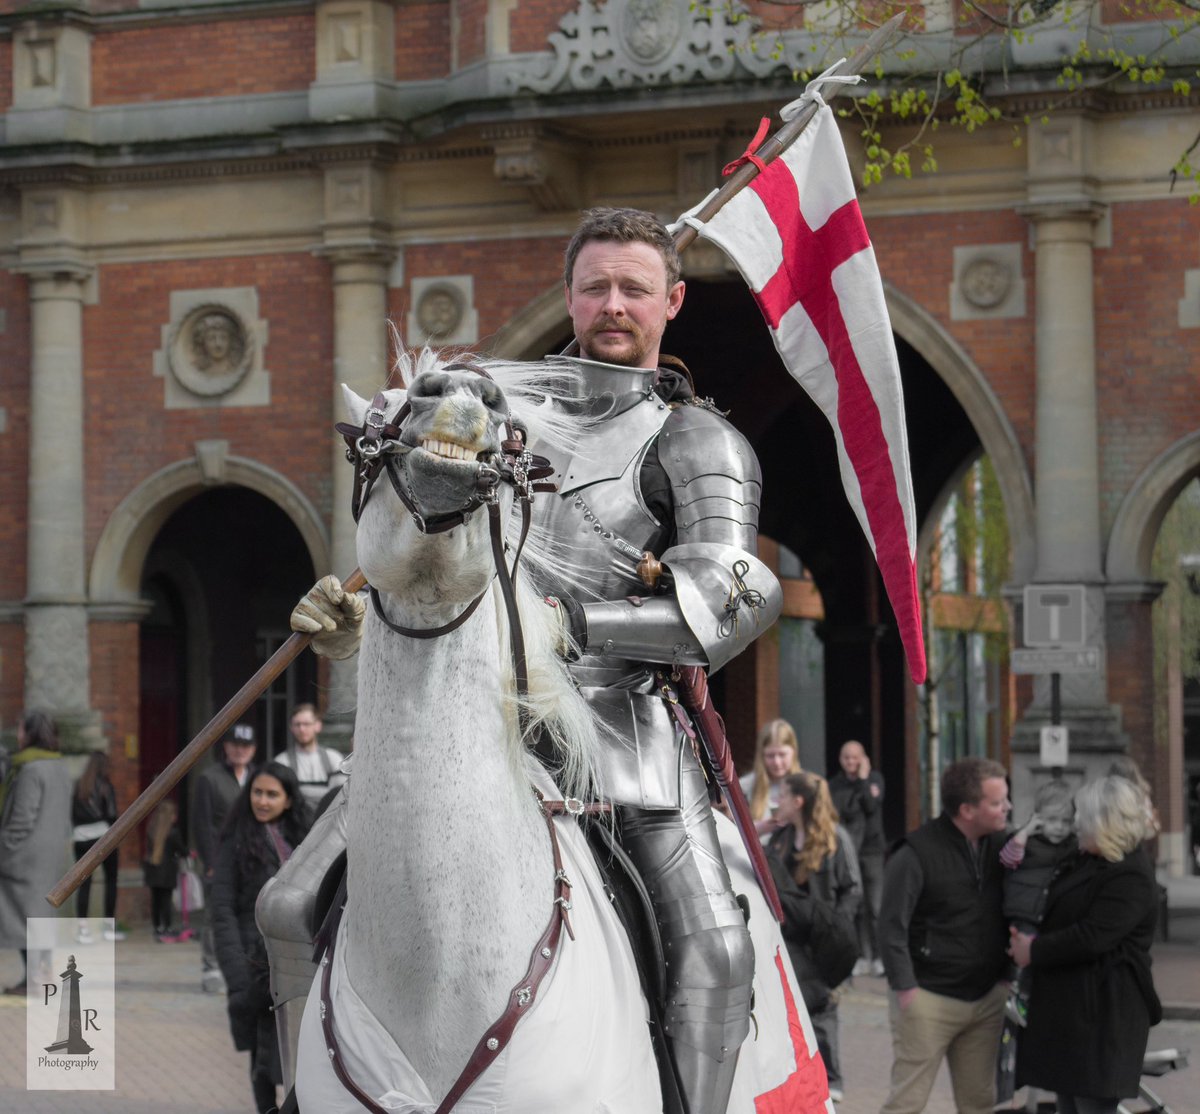 St George is leading our ✨ Grand Parade ✨ today from 3pm in Aylesbury’s Market Square. Come down to witness a parade to be proud of! bit.ly/StGeorge24